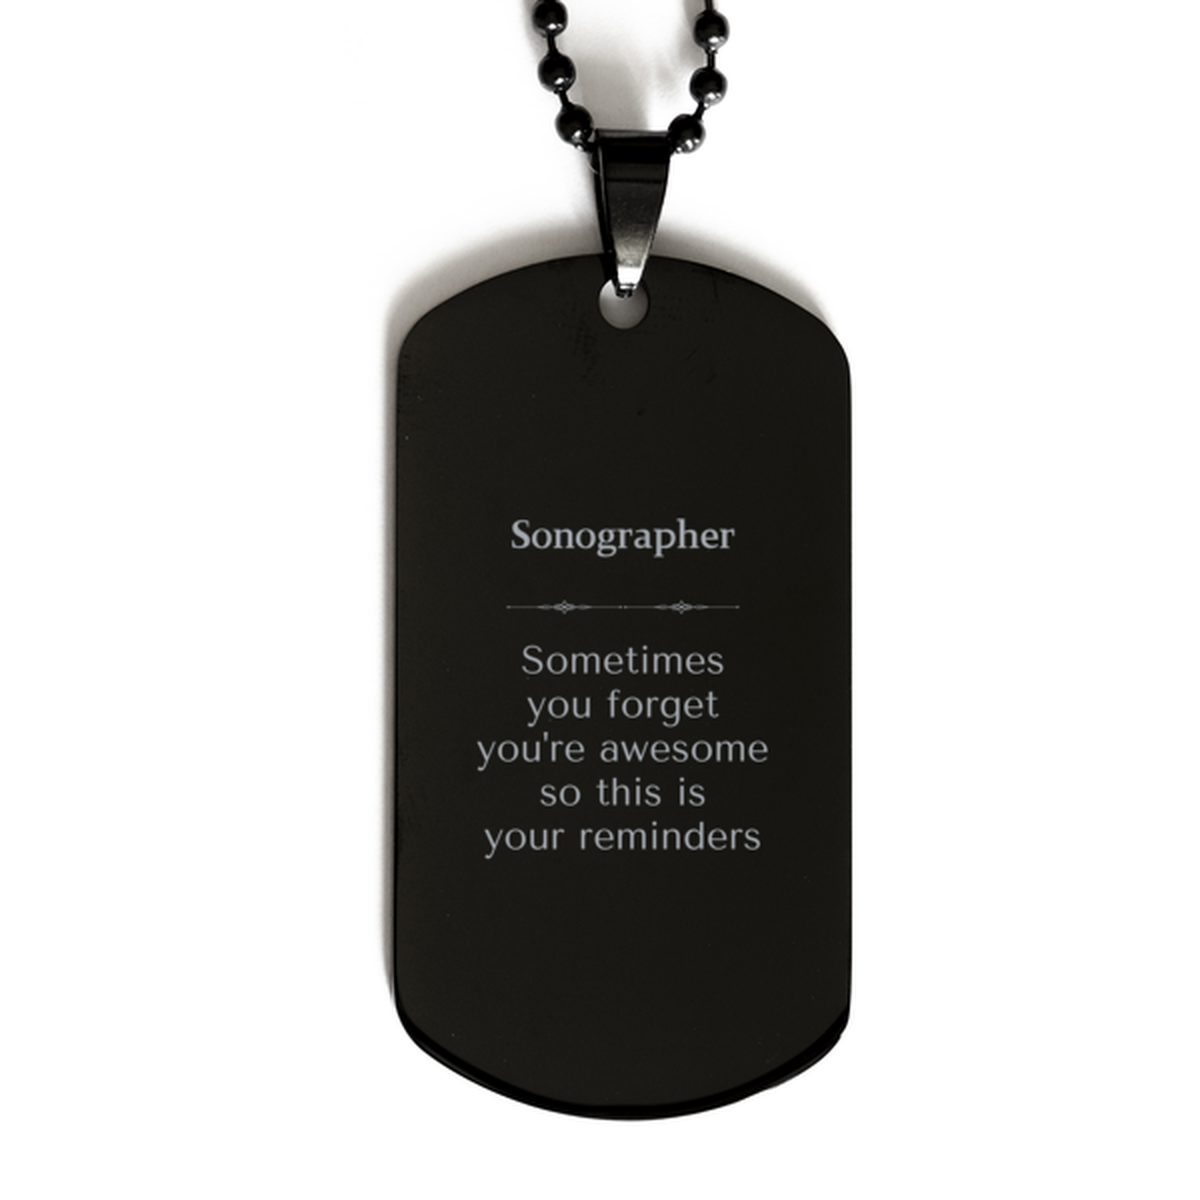 Sentimental Sonographer Black Dog Tag, Sonographer Sometimes you forget you're awesome so this is your reminders, Graduation Christmas Birthday Gifts for Sonographer, Men, Women, Coworkers